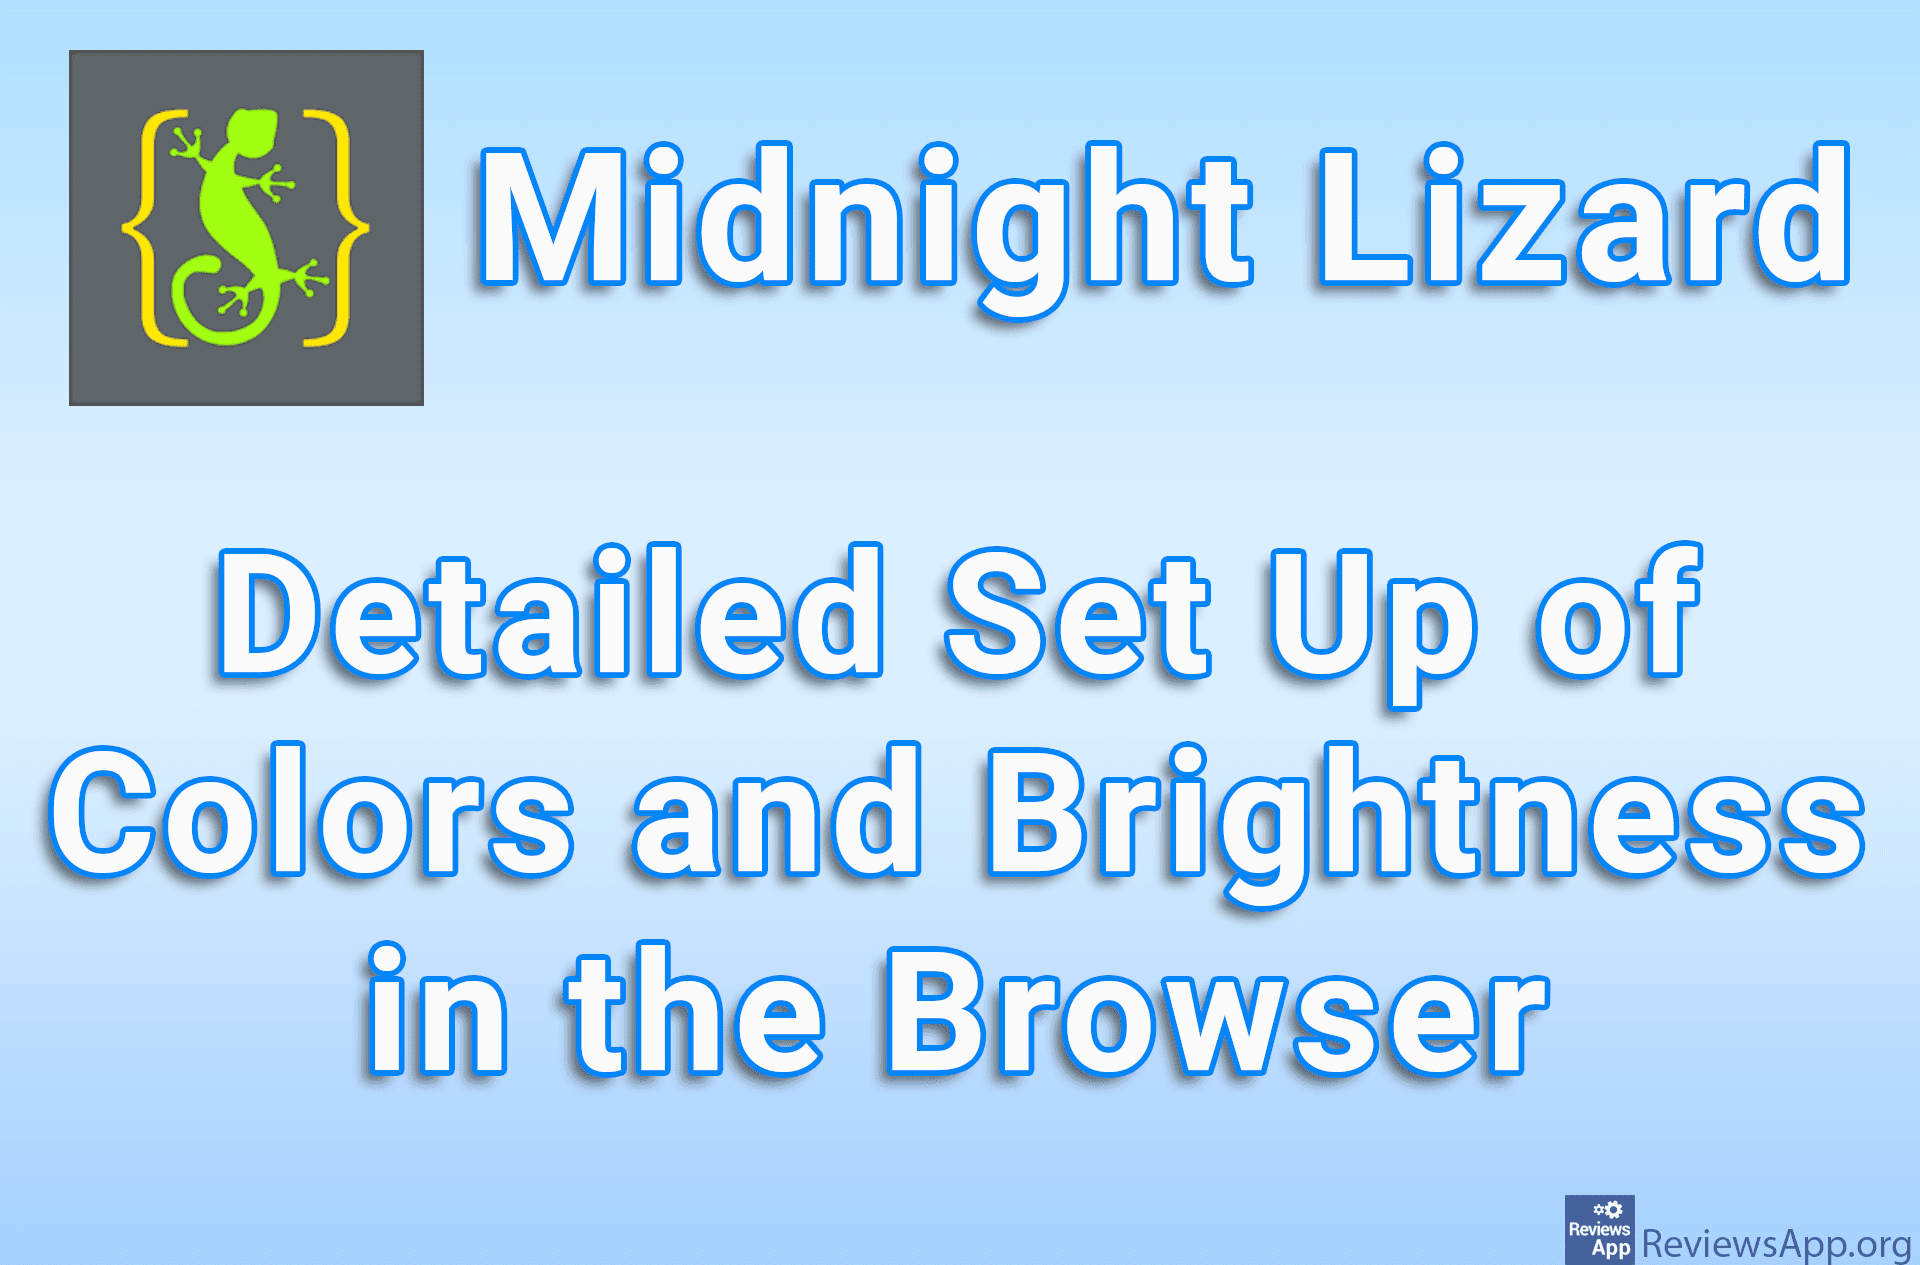 Midnight Lizard – Detailed Set Up of Colors and Brightness in the Browser